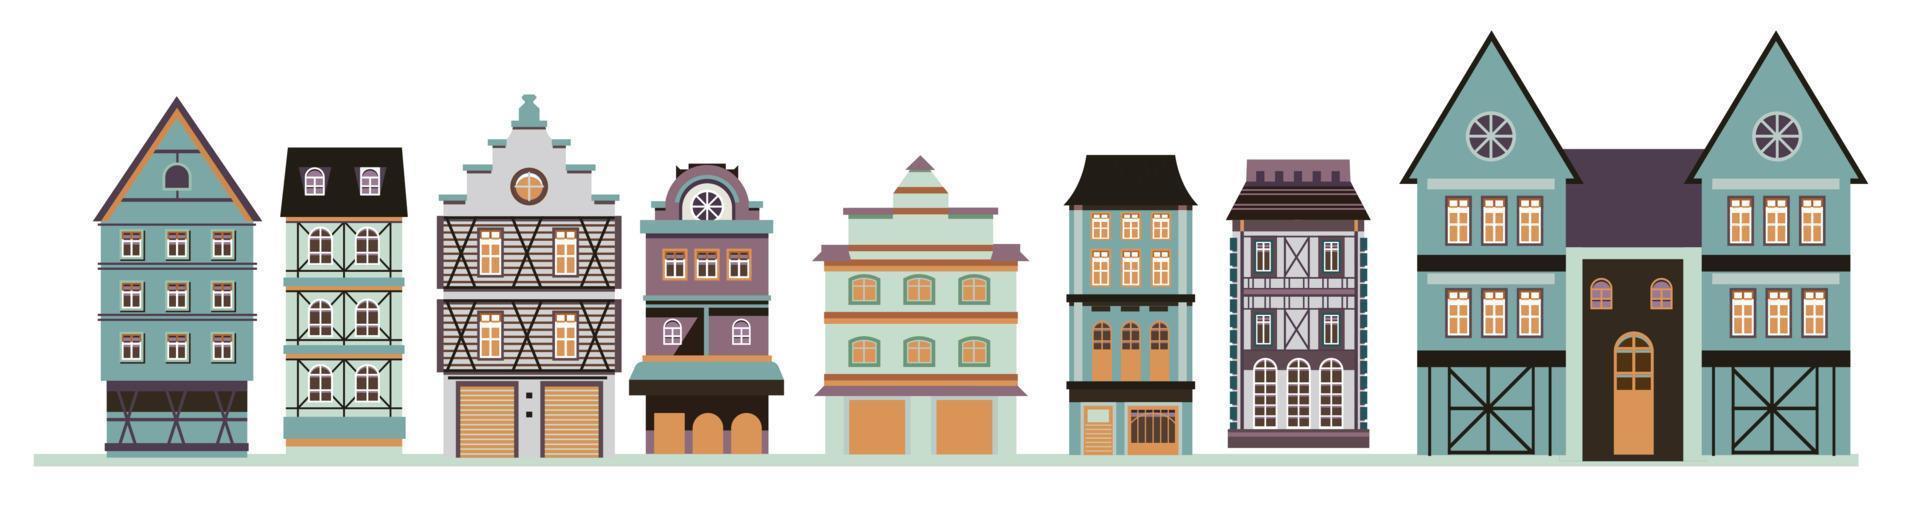 Old town buildings and architecture houses street vector